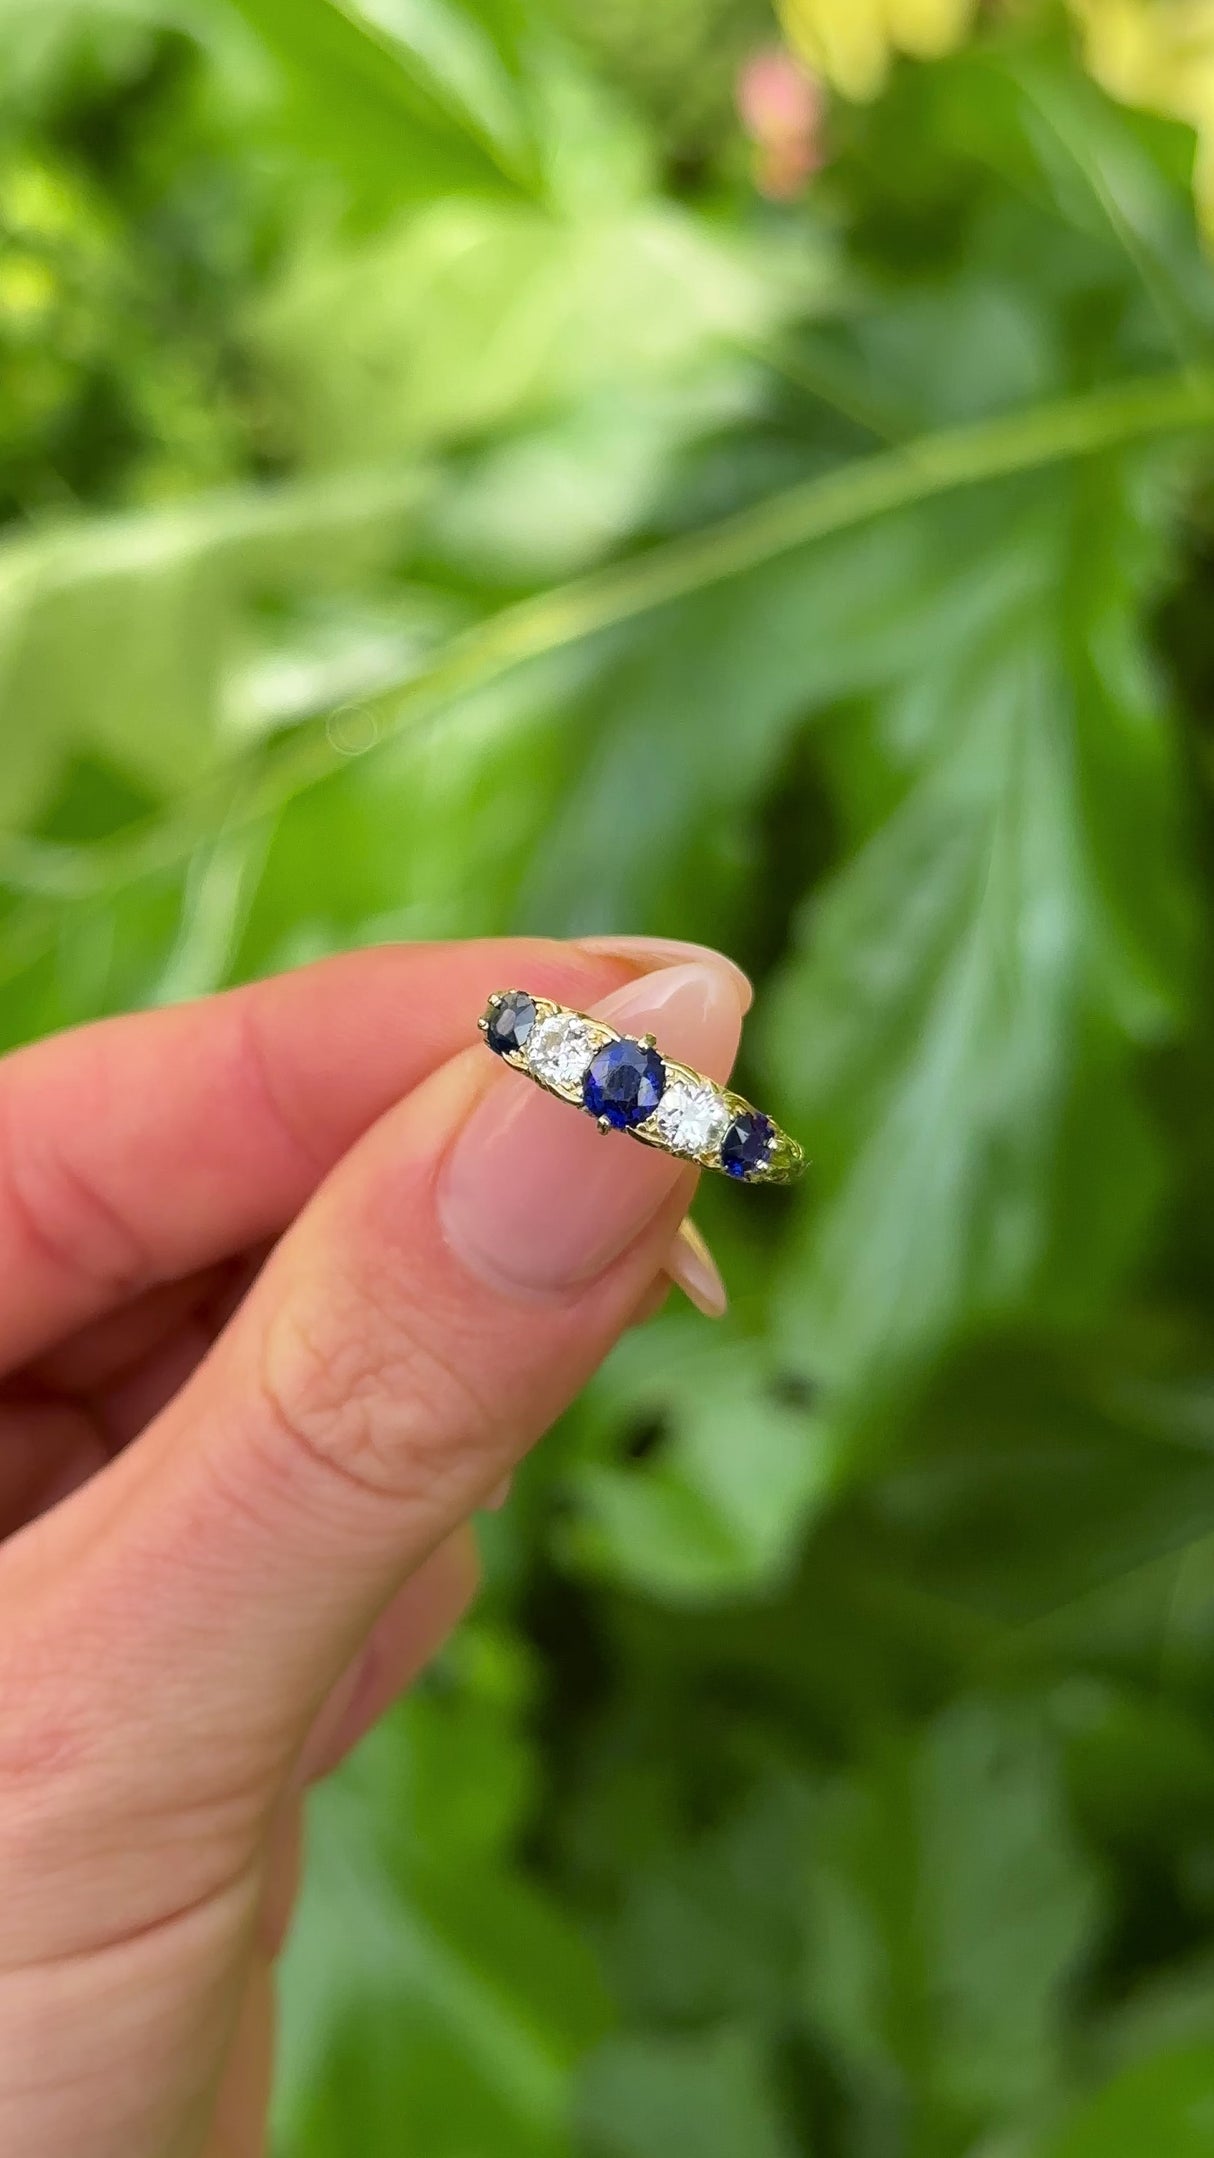 Antique, Edwardian Sapphire and Diamond Five-Stone Ring, 18ct Yellow Gold held in fingers.